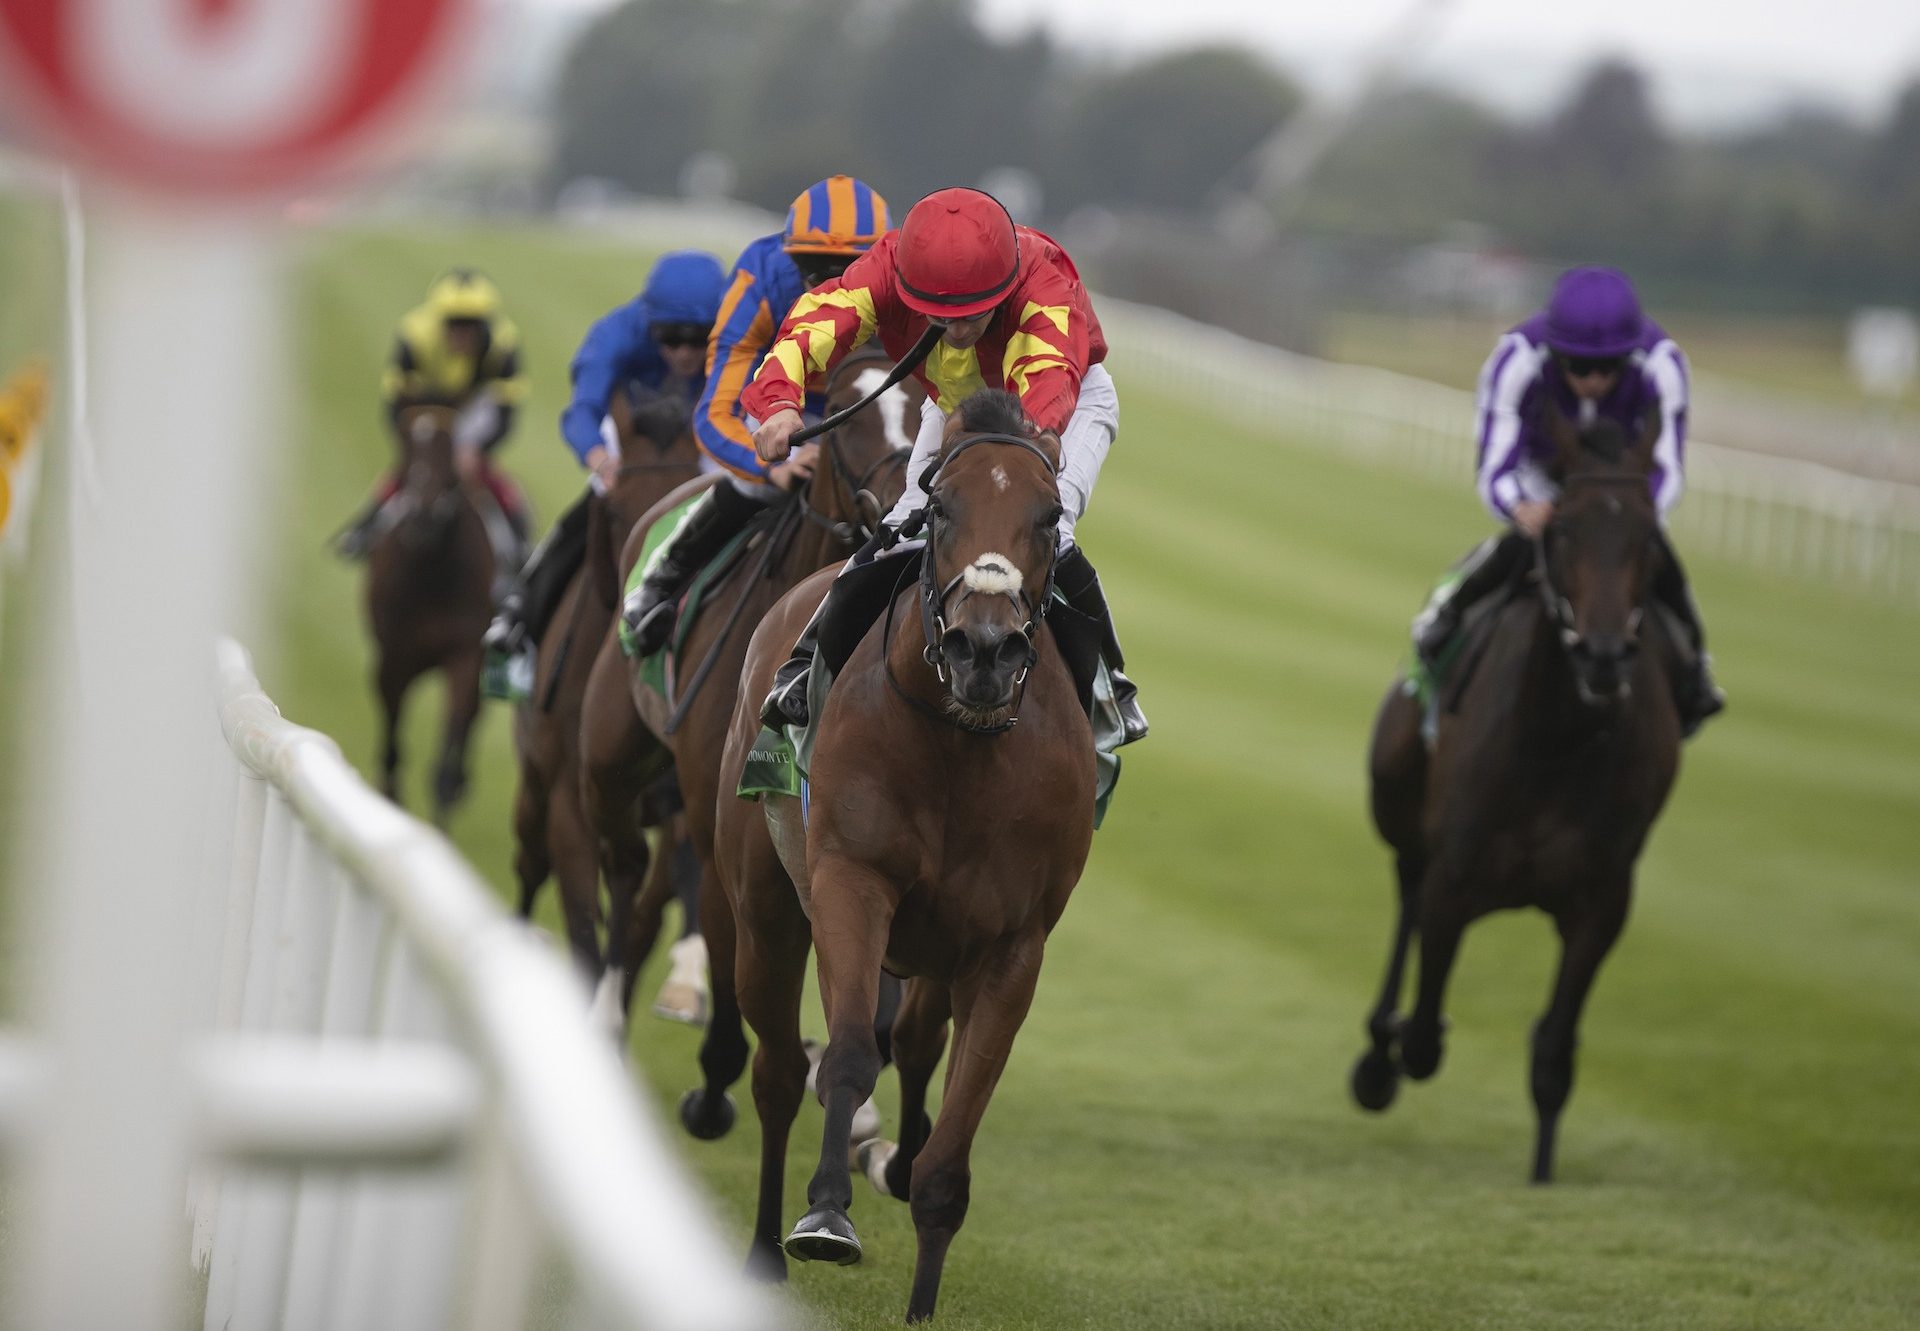 Iridessa (Ruler Of The World) winning the Gr.1 Pretty Polly at the Curragh